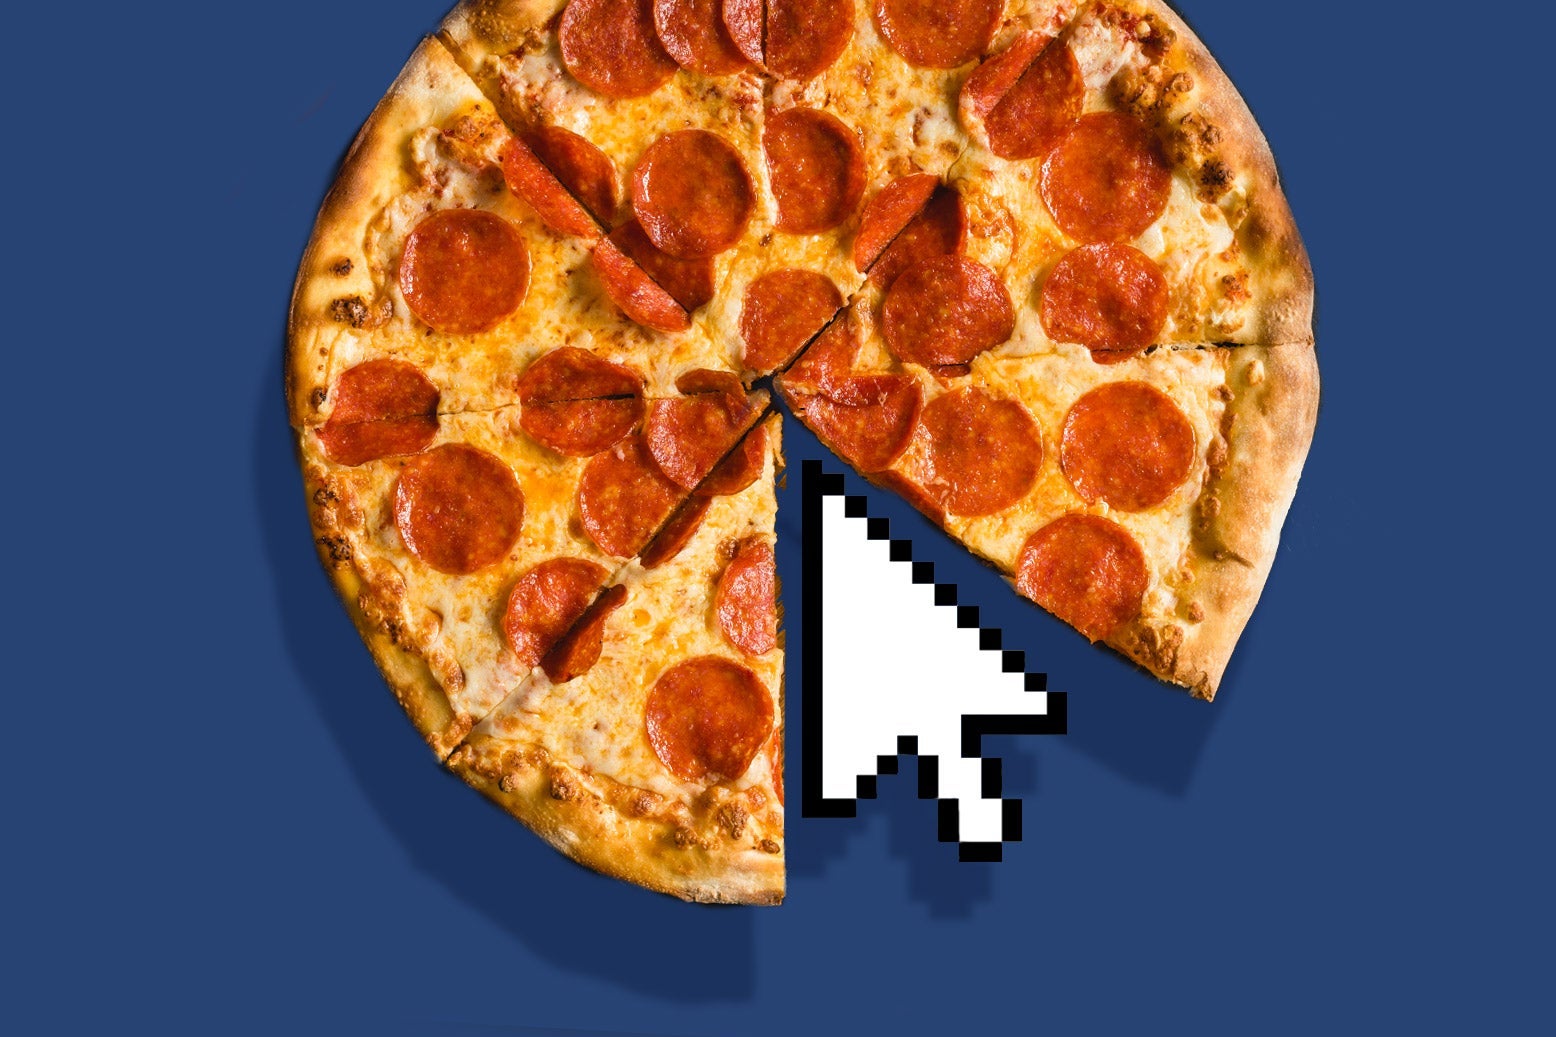 Photo illustration of pepperoni pizza, with a mouse cursor replacing one slice of pizza.